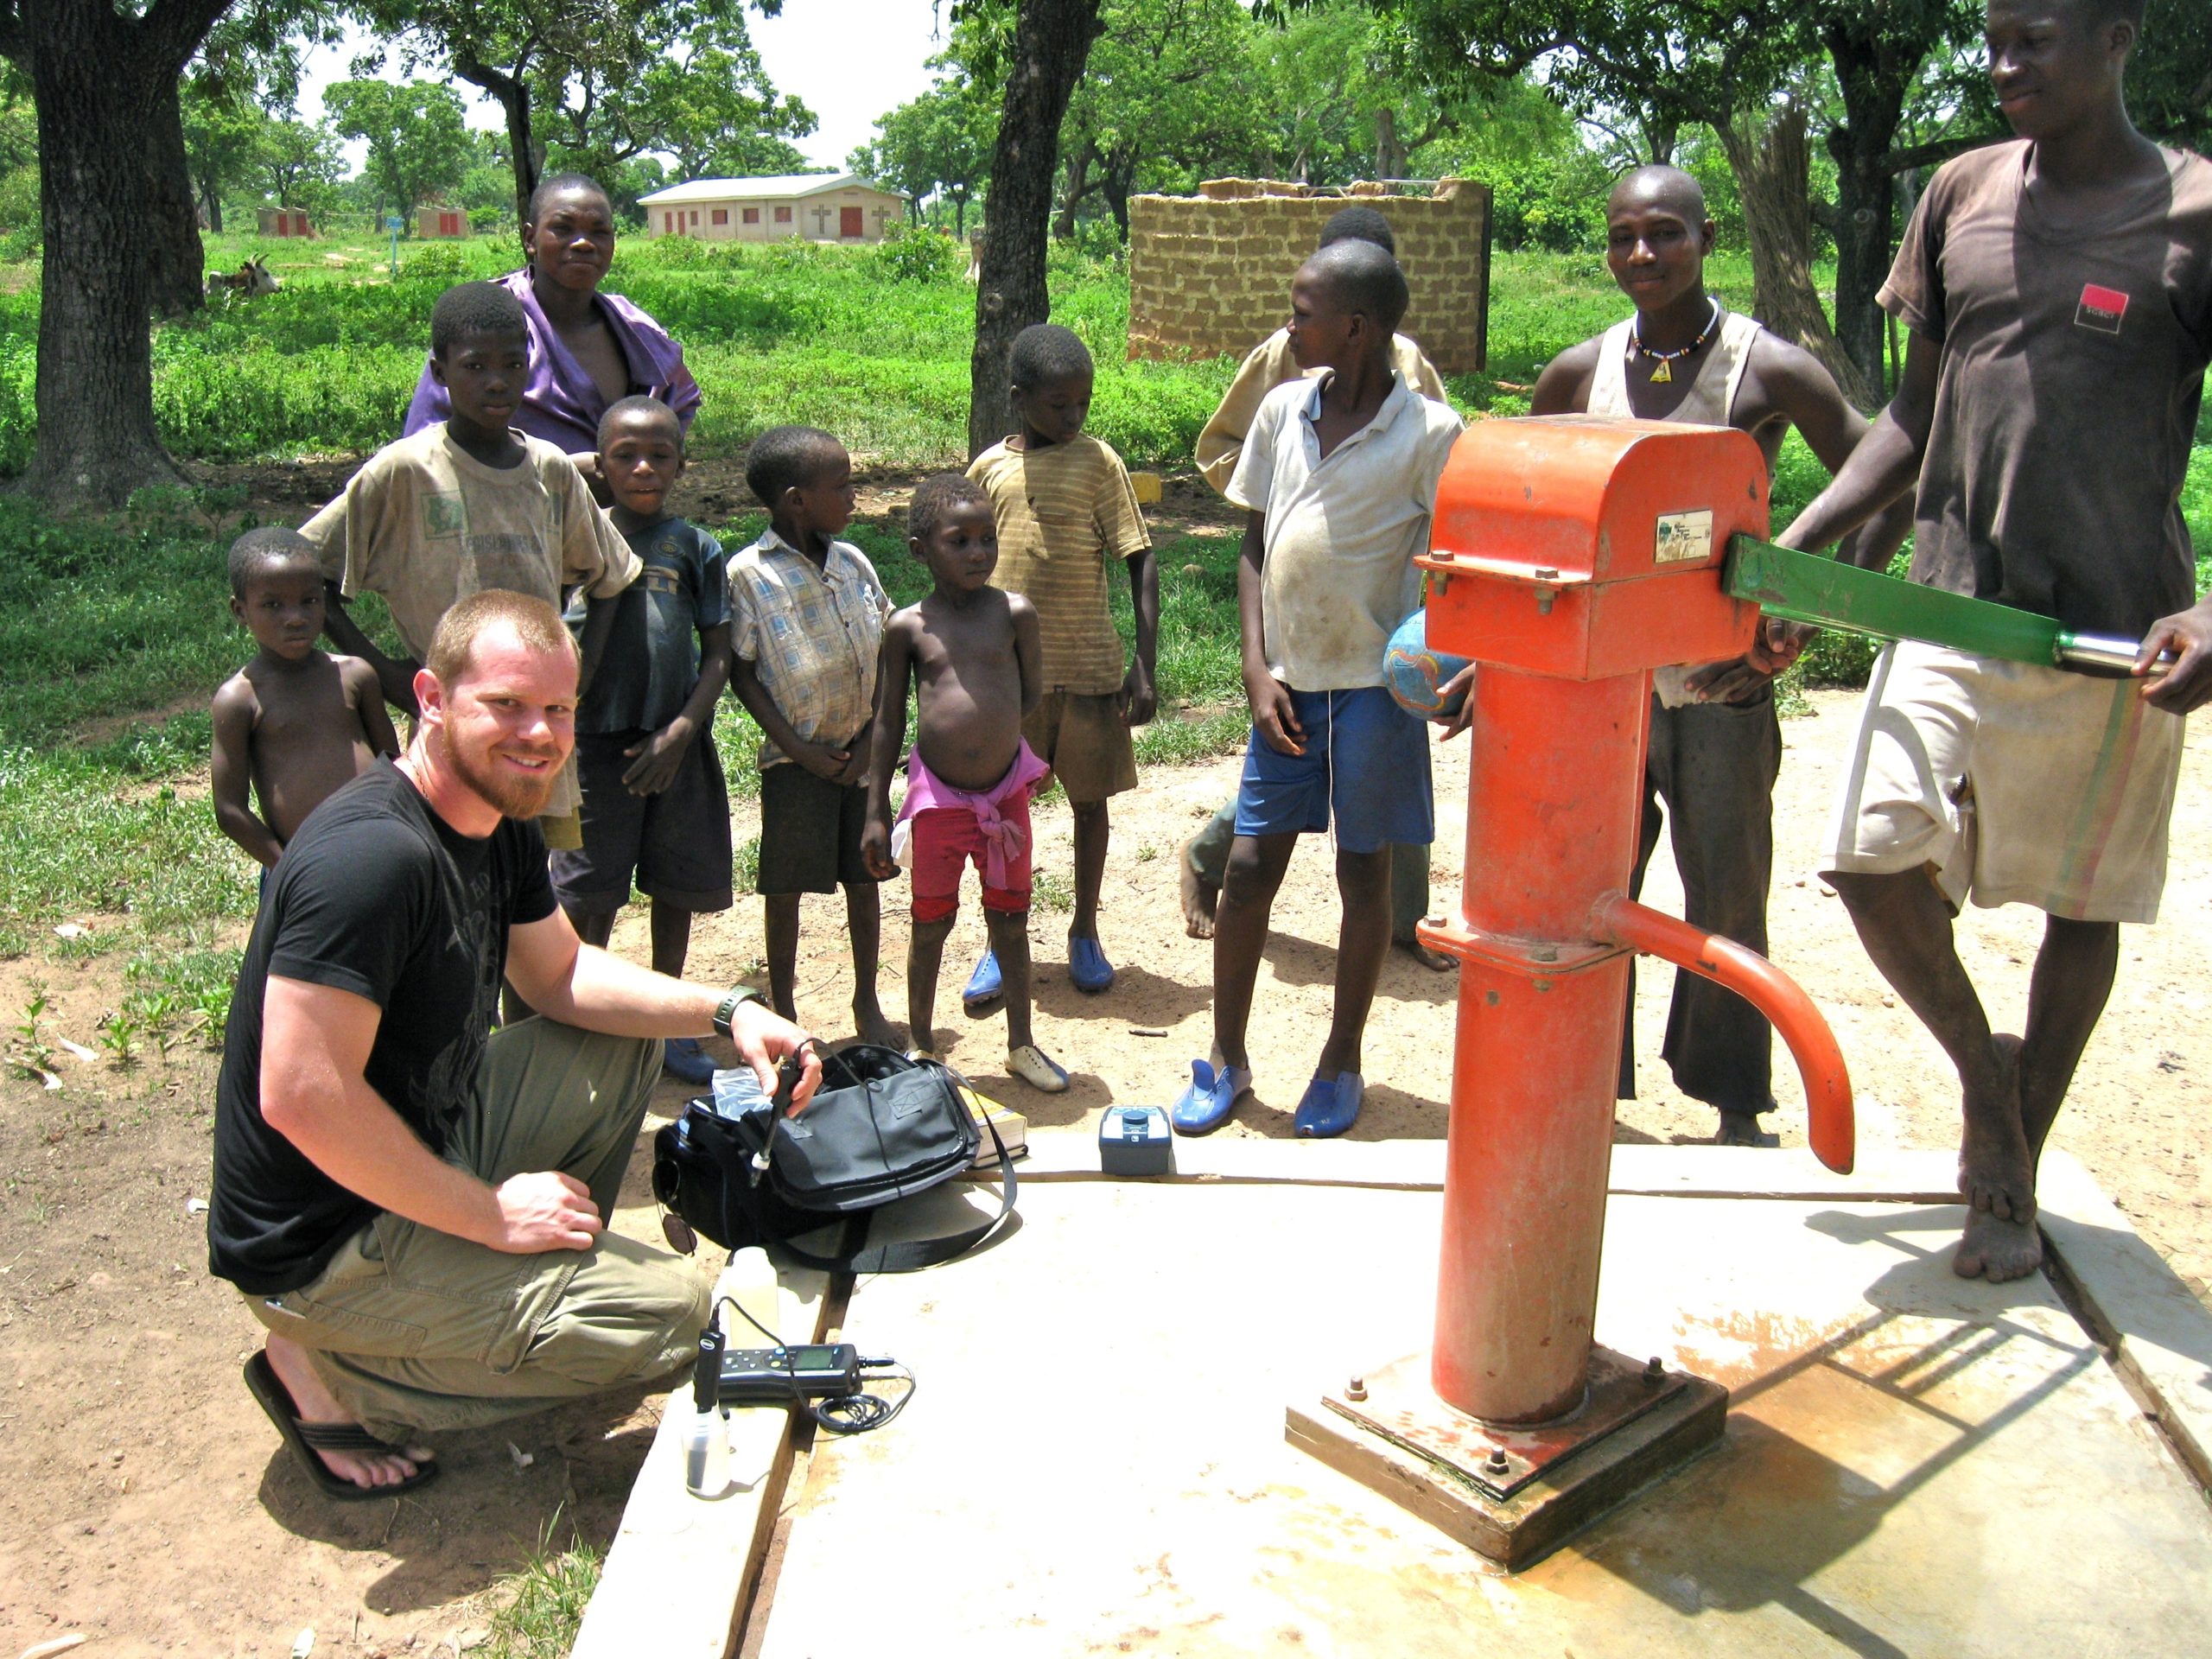 Chance Coe, a water quality technician at Denver Water, visited Cote D’Ivoire in Africa as part of a college project to provide a safe water supply for people in the community.